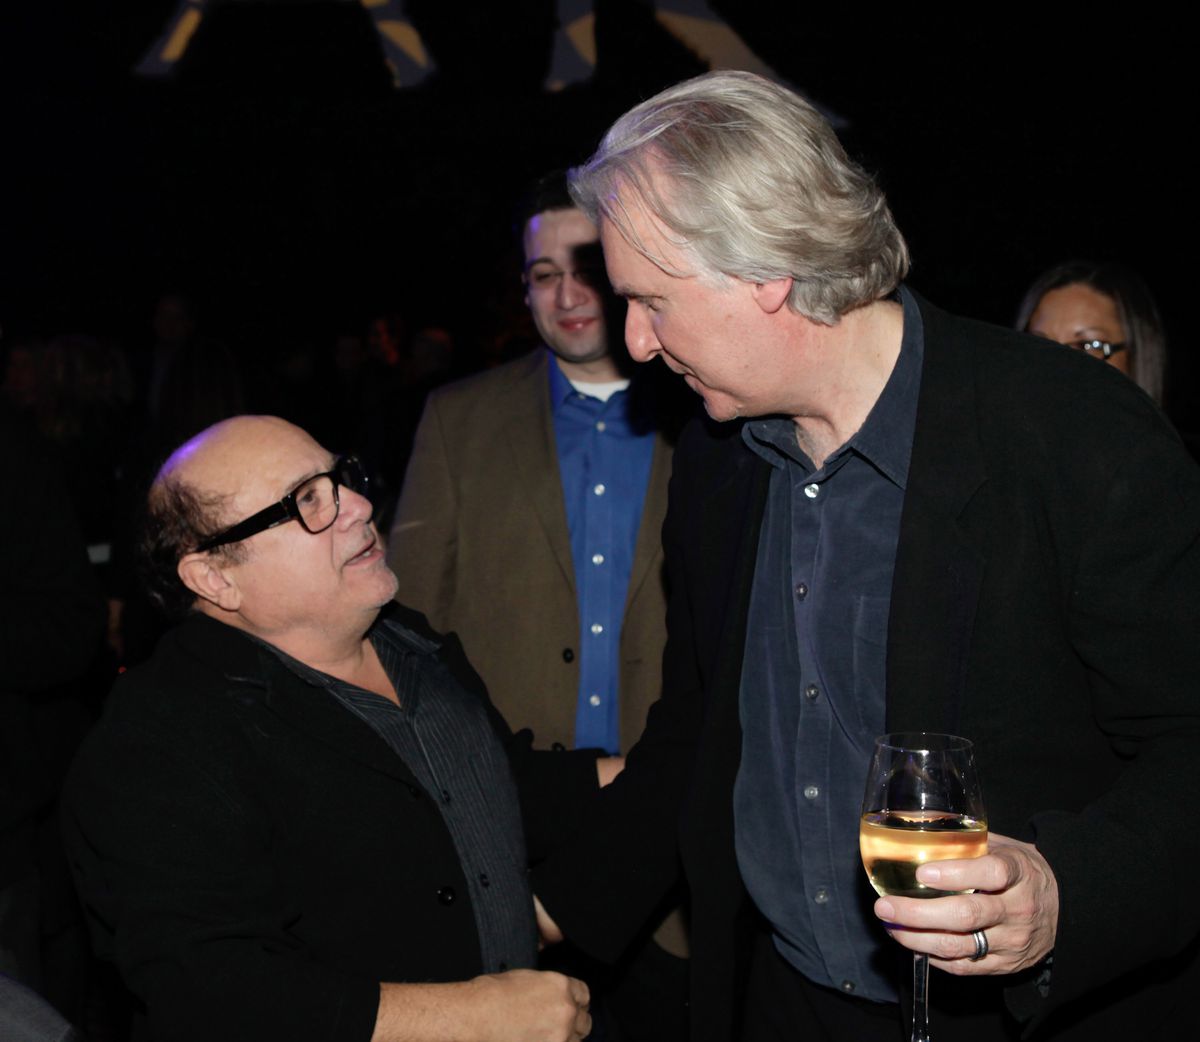 Danny Devito looks up to talk to director James Cameron, who is holding a glass of white wine at the post-Avatar party